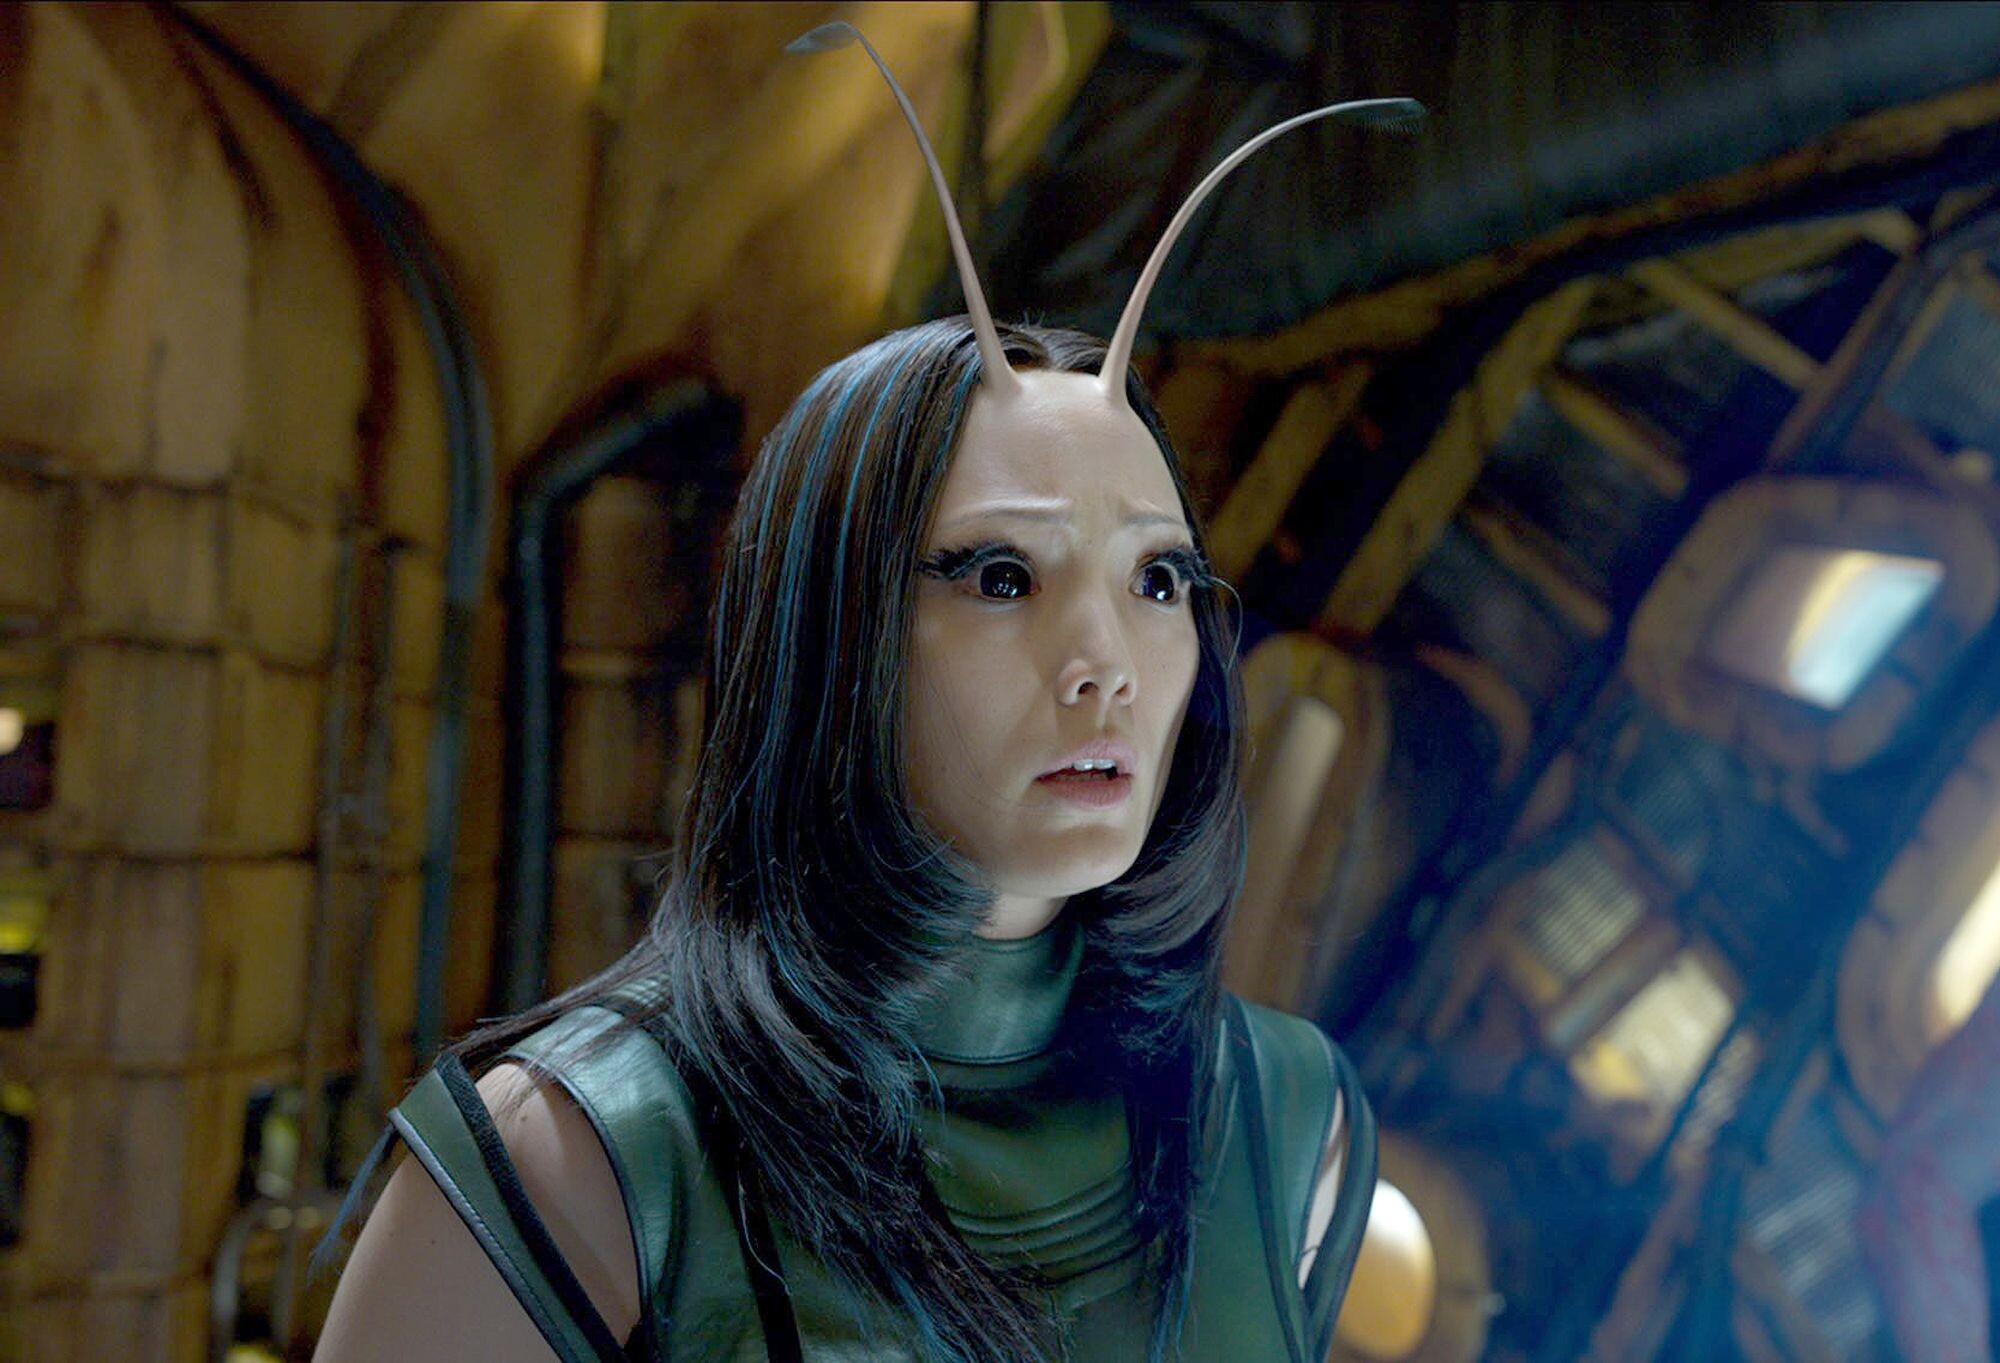 Pom Klementieff: A French actress who played Mantis in 2017 movie Guardians of the Galaxy Vol. 2. 2000x1370 HD Wallpaper.